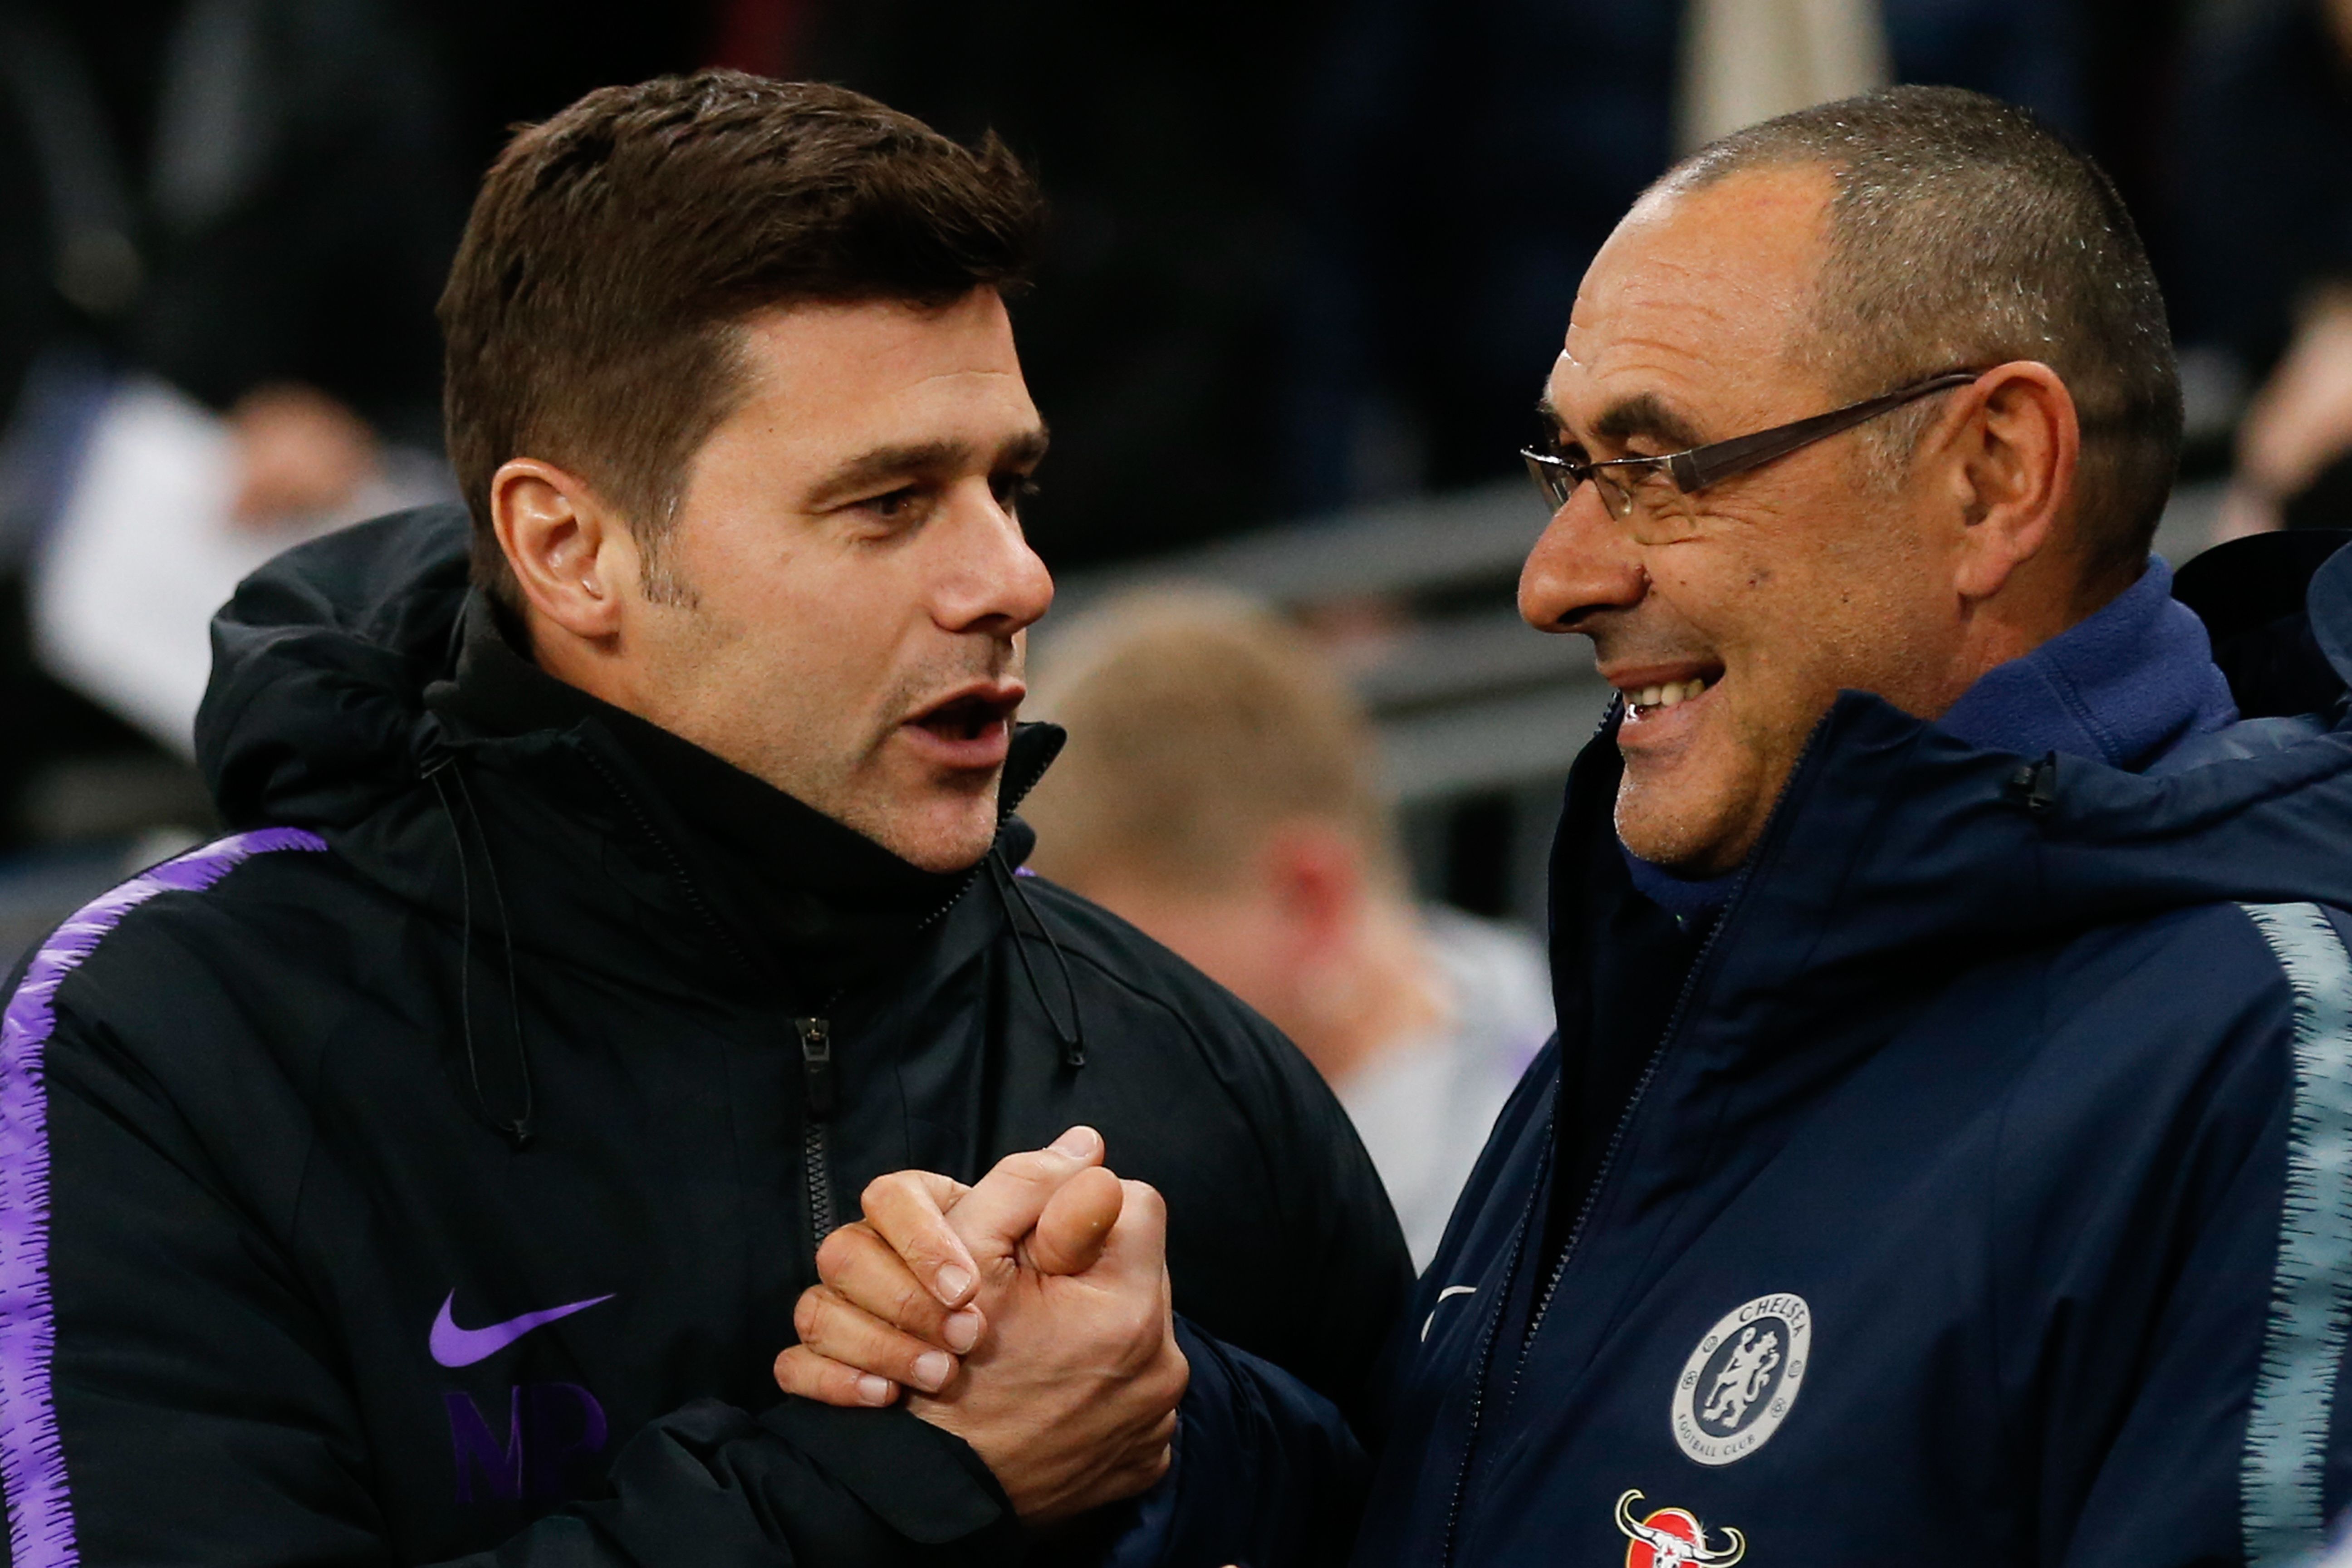 Chelsea's Italian head coach Maurizio Sarri (R) greets Tottenham Hotspur's Argentinian head coach Mauricio Pochettino (L) before the English Premier League football match between Tottenham Hotspur and Chelsea at Wembley Stadium in London, on November 24, 2018. (Photo by Ian KINGTON / IKIMAGES / AFP) / RESTRICTED TO EDITORIAL USE. No use with unauthorized audio, video, data, fixture lists, club/league logos or 'live' services. Online in-match use limited to 45 images, no video emulation. No use in betting, games or single club/league/player publications.        (Photo credit should read IAN KINGTON/AFP/Getty Images)